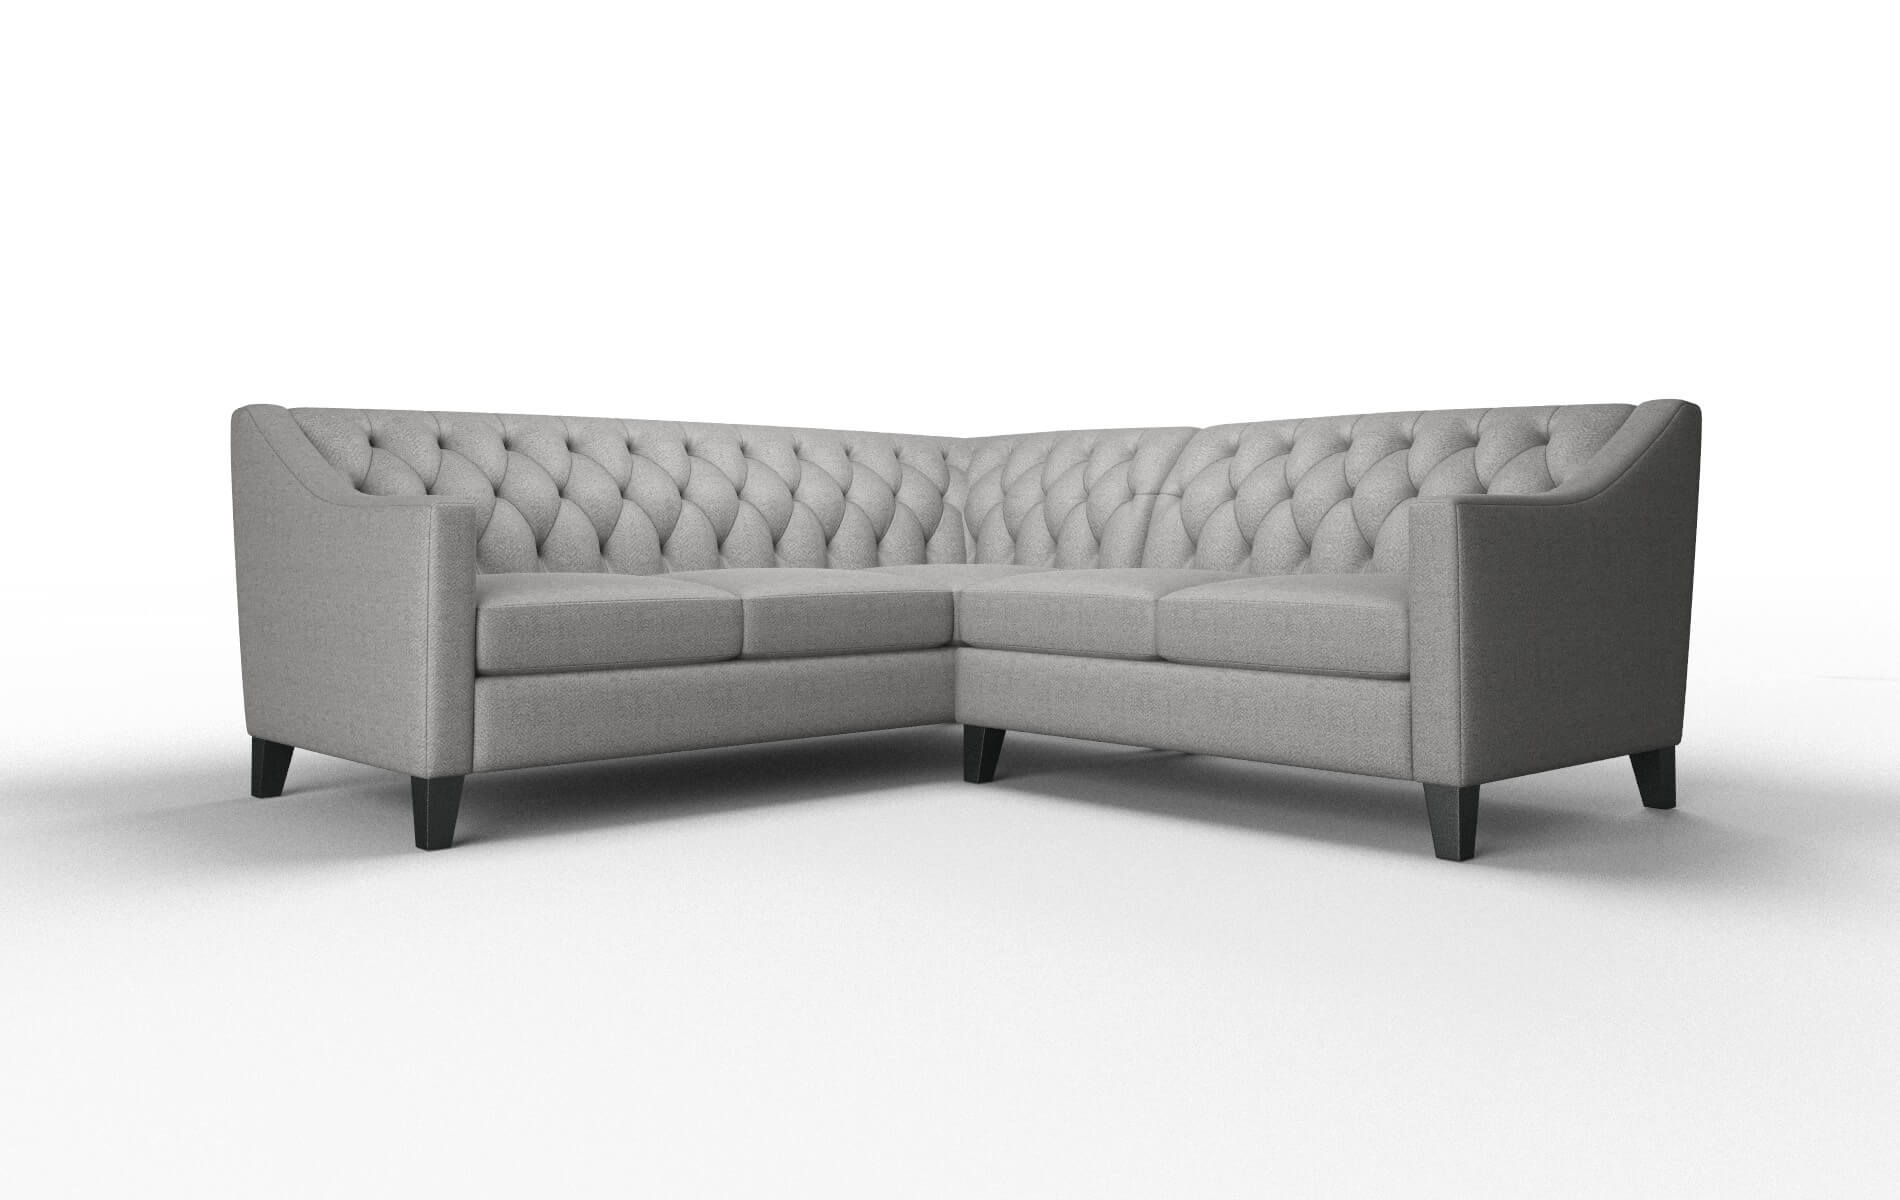 Seville Catalina Steel Sectional espresso legs